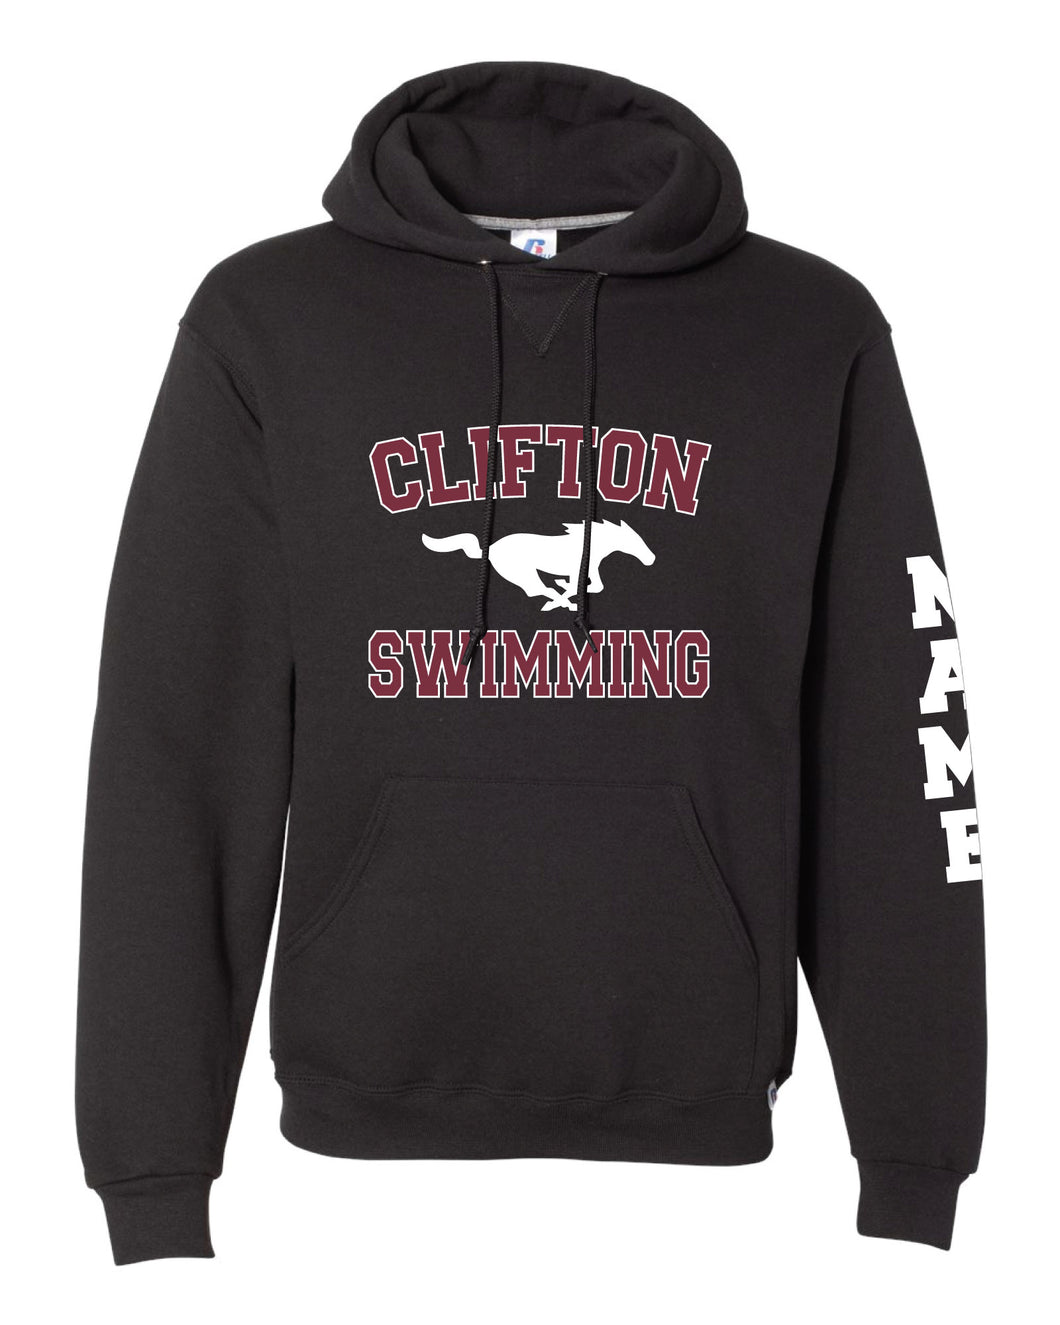 Clifton Swimming Russell Athletic Cotton Hoodie - Black - 5KounT